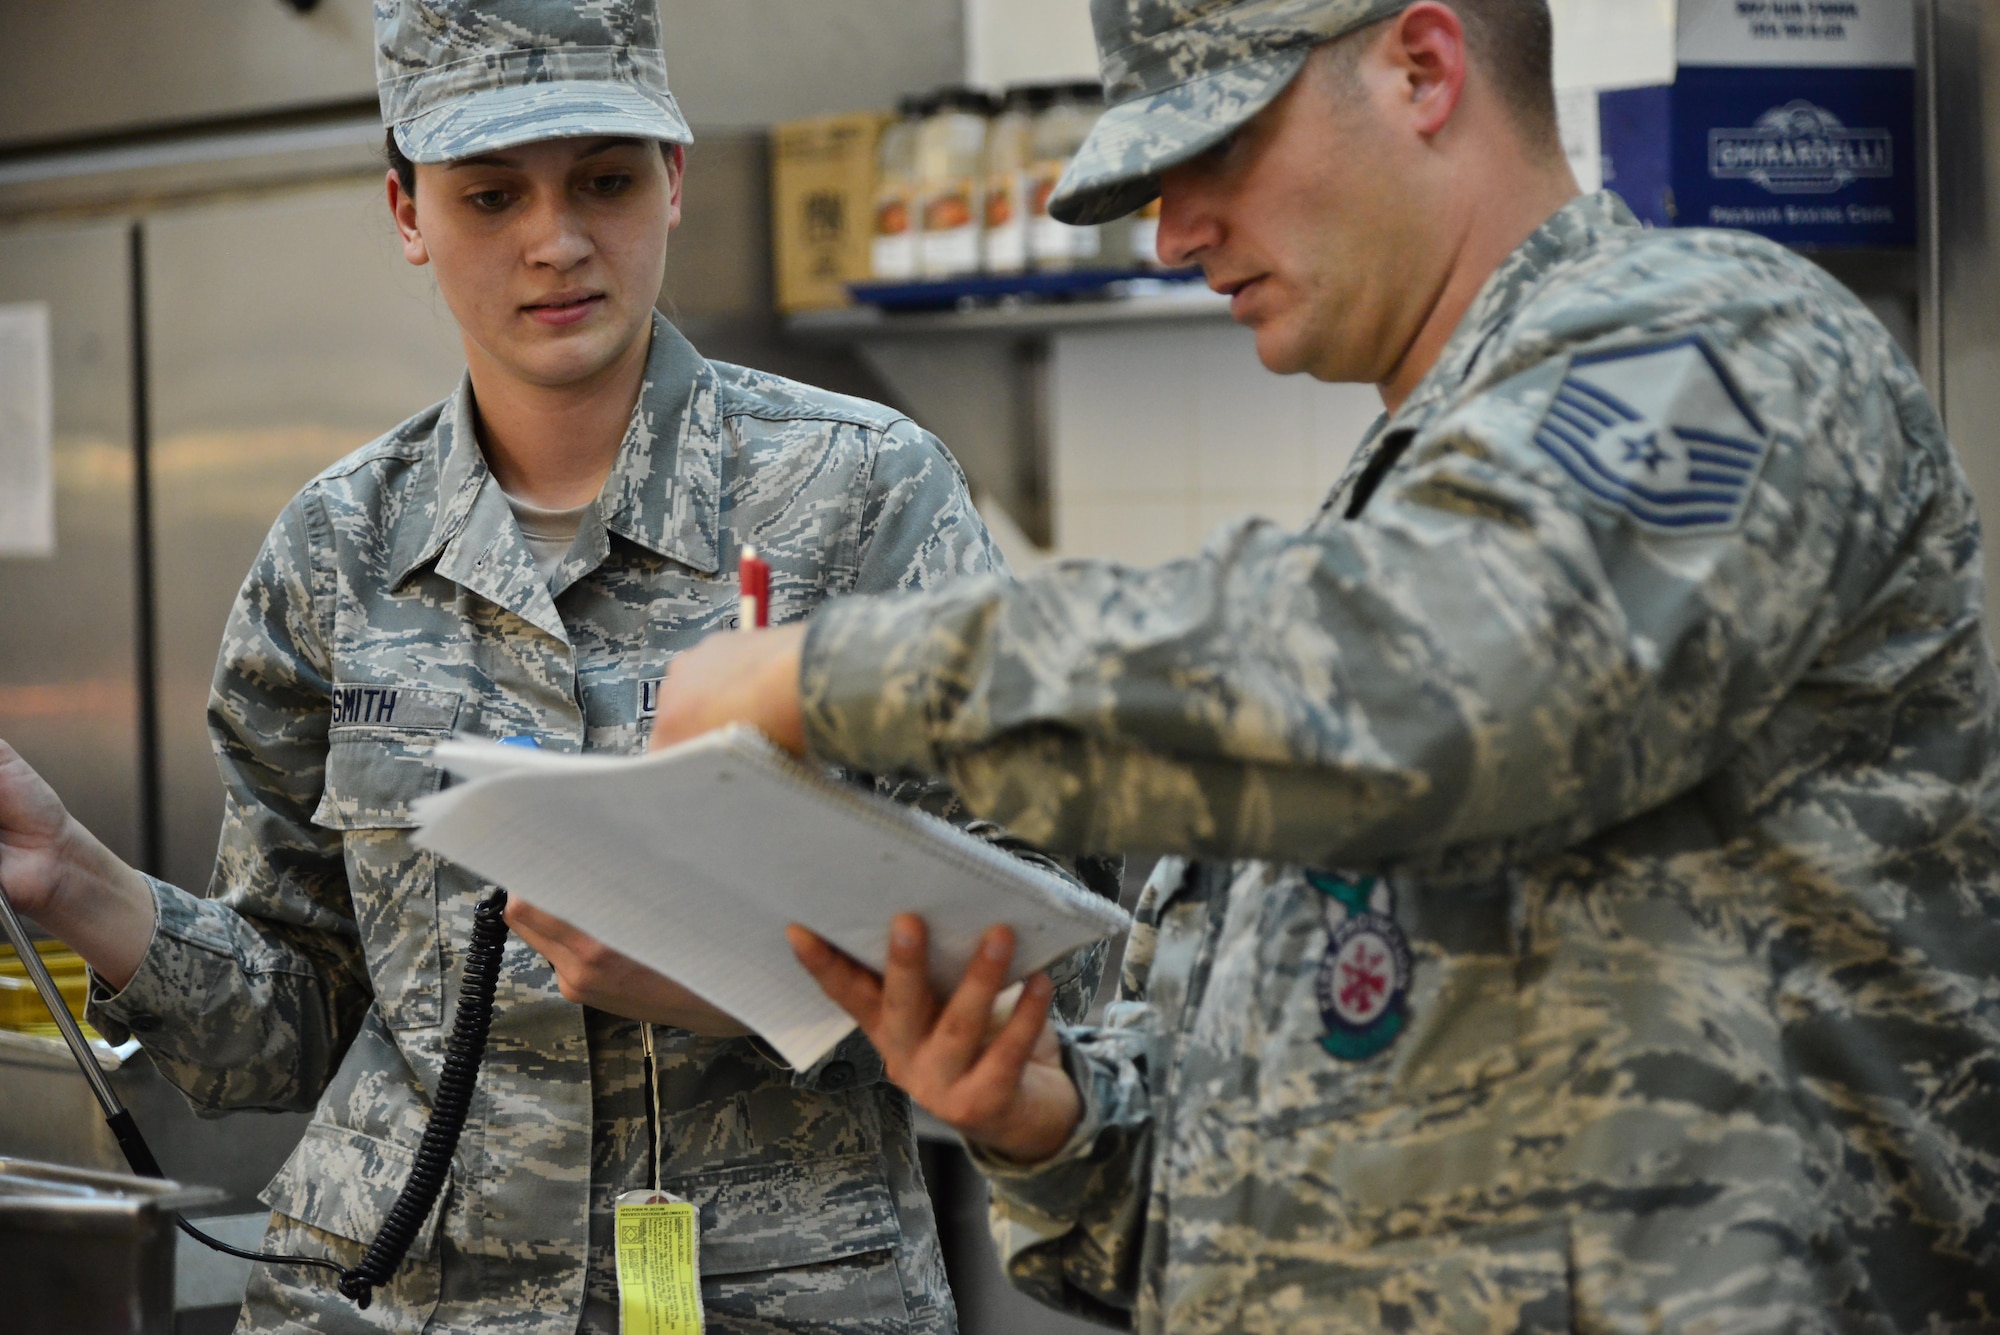 Senior Airman Leah Smith, 379th Expeditionary Medical Operations Support Squadron Bioenvironmental, overlooks as Master Sgt. Christopher Lance, 379th Expeditionary Civil Engineer Squadron Fire Department, writes down the corresponding air flow measurements for each section of a dining facility ventilation system September 30, 2015 at Al Udeid Air Base, Qatar. (U.S. Air Force photo/Staff Sgt. Alexandre Montes)  